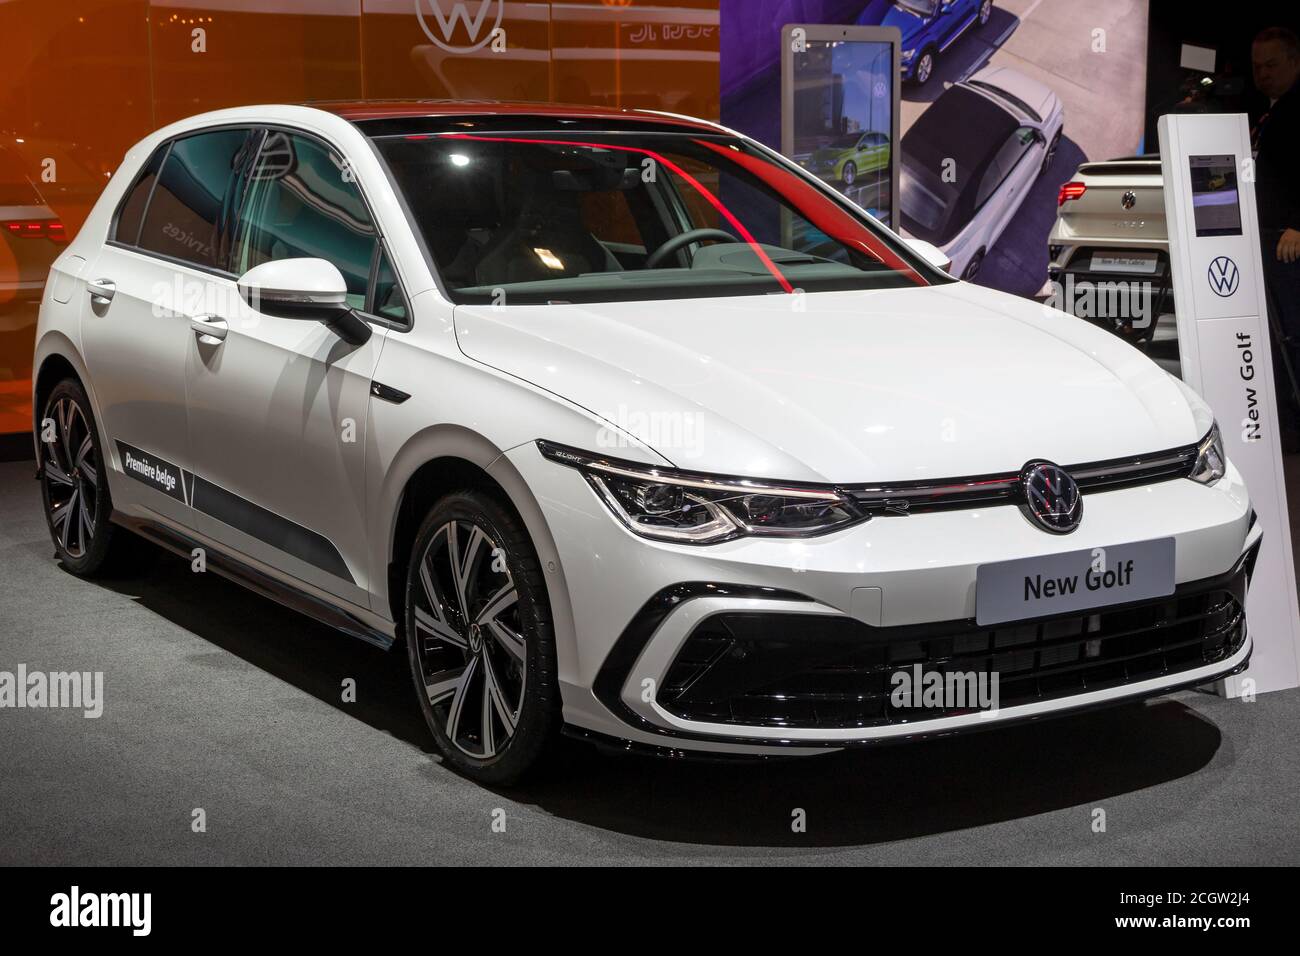 BRUSSELS - JAN 9, 2020: New Volkswagen Golf car model showcased at the  Brussels Autosalon 2020 Motor Show Stock Photo - Alamy